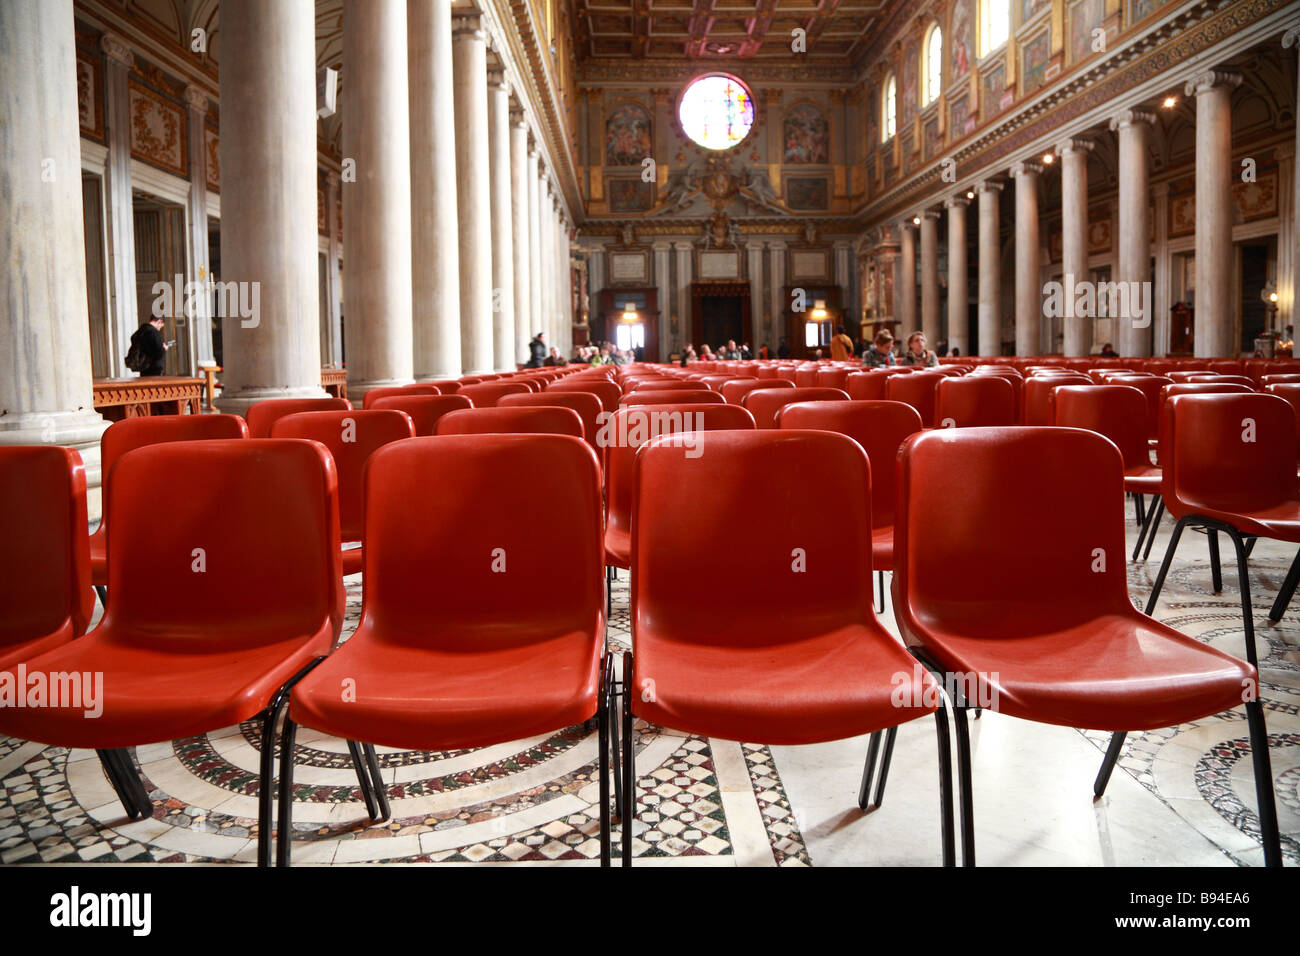 Row Of Red Plastic Chairs In The Church Of Saint Mary Major Santa